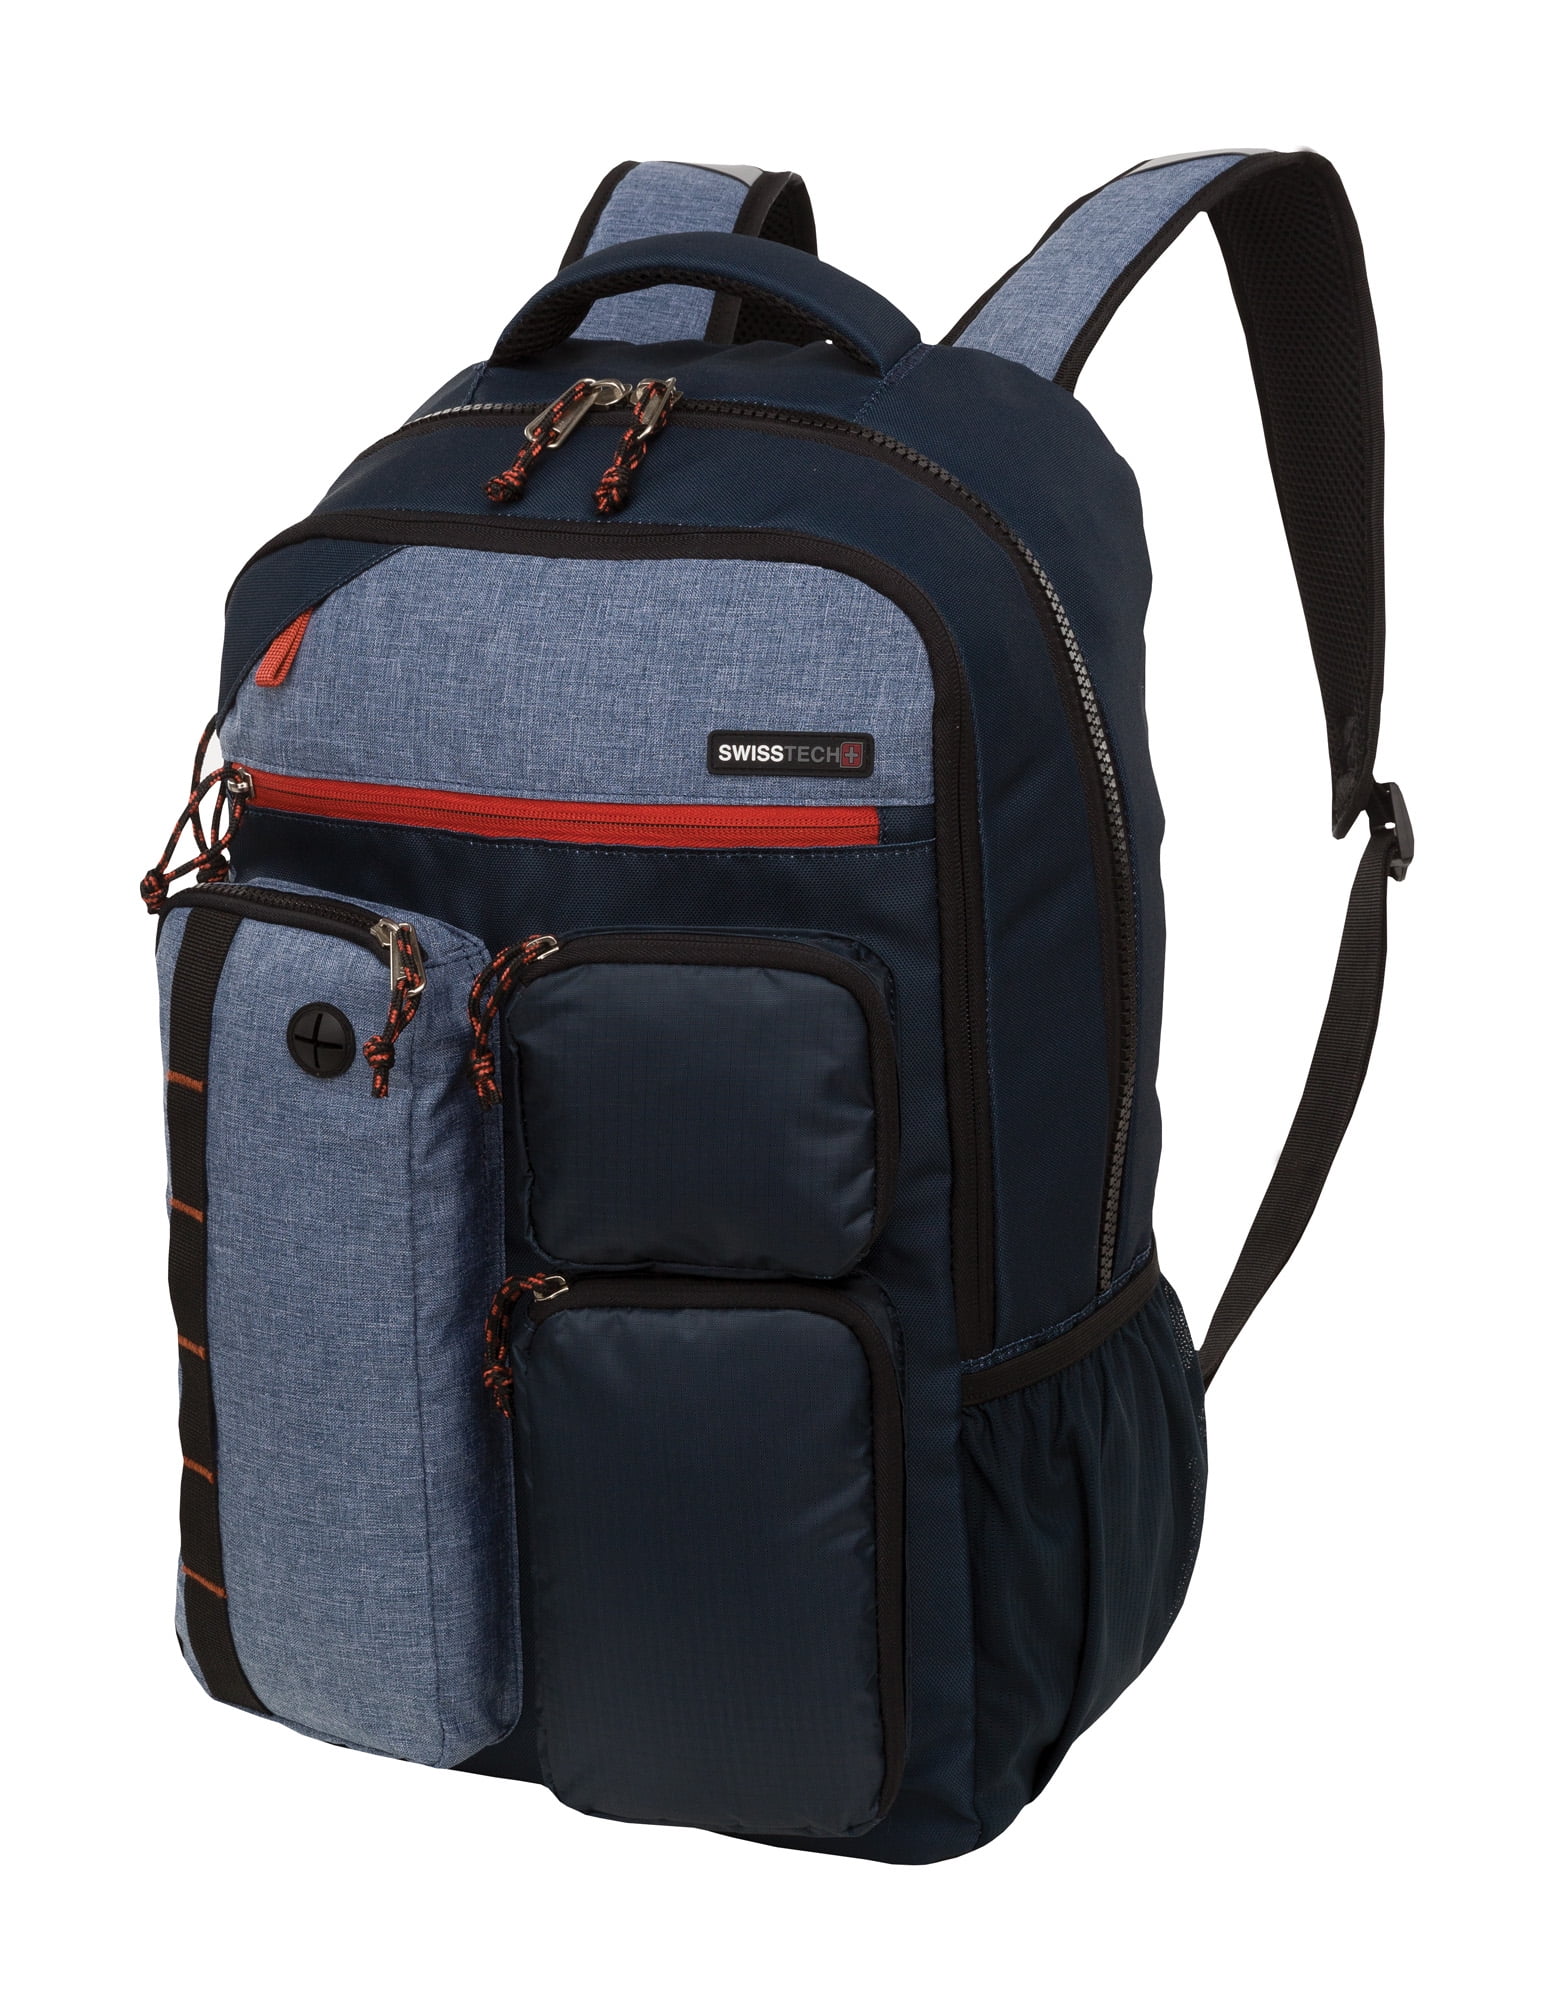 Swiss Tech Lucerne 34.4 Ltr School Laptop Backpack with Tablet Sleeve ...